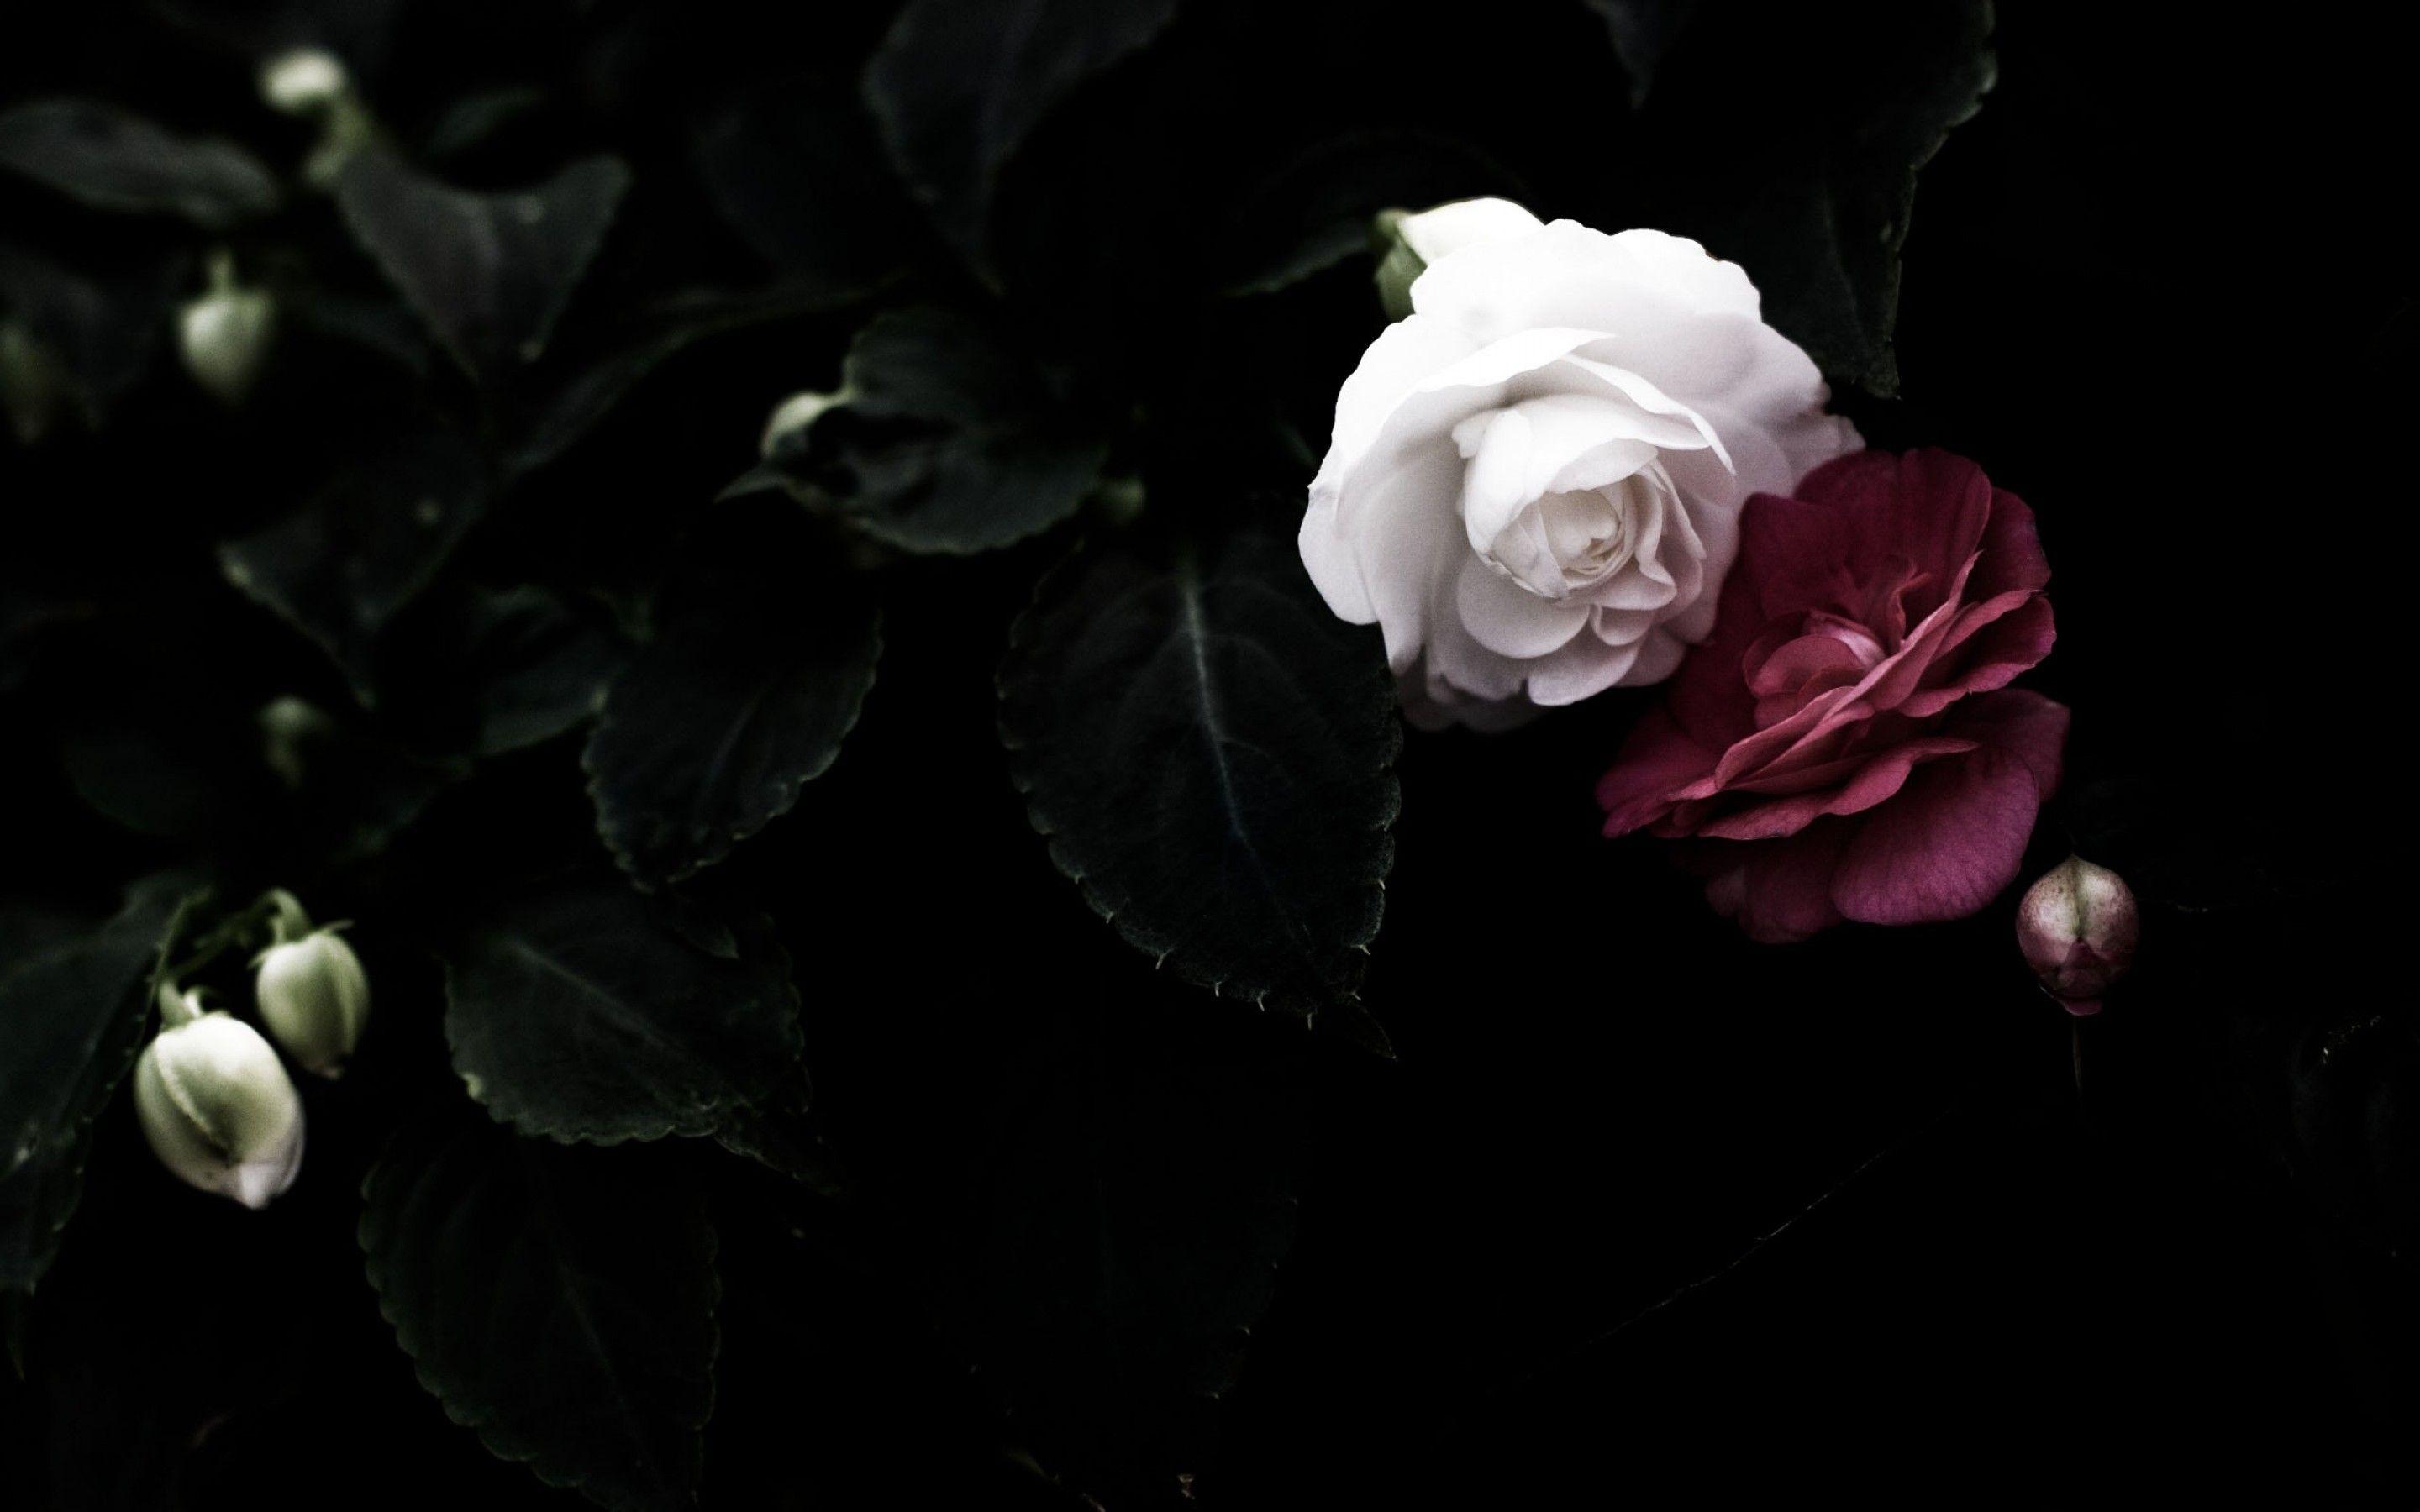 Wallpapers Of Black Roses Group (67+)